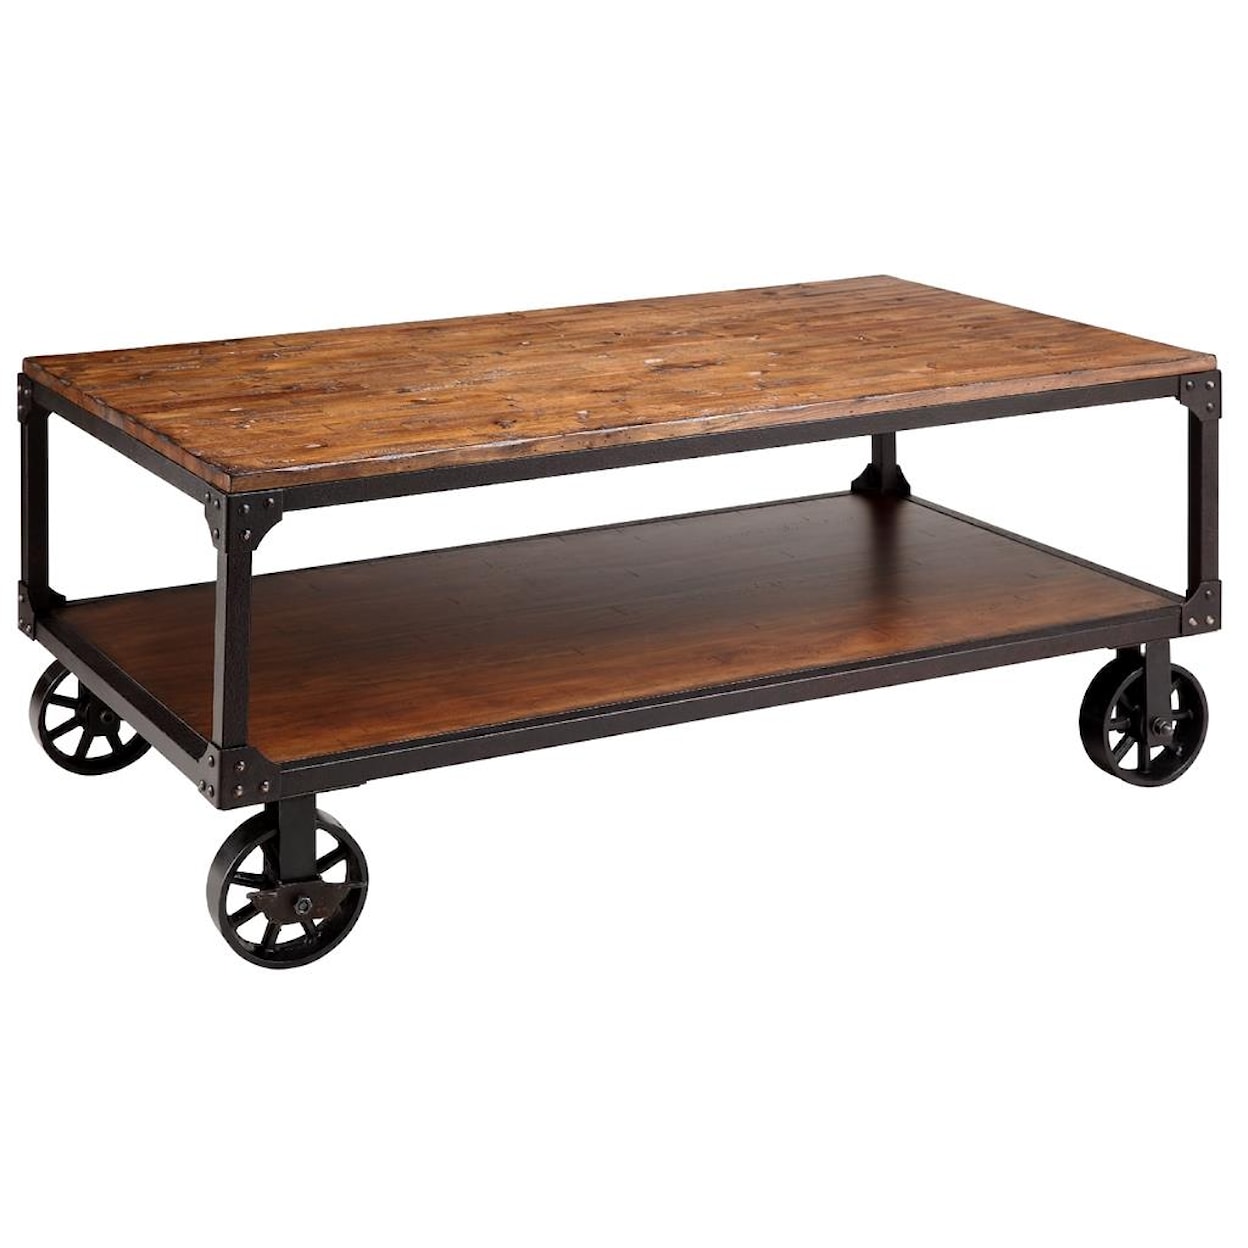 Stein World Accent Tables Coffee Table